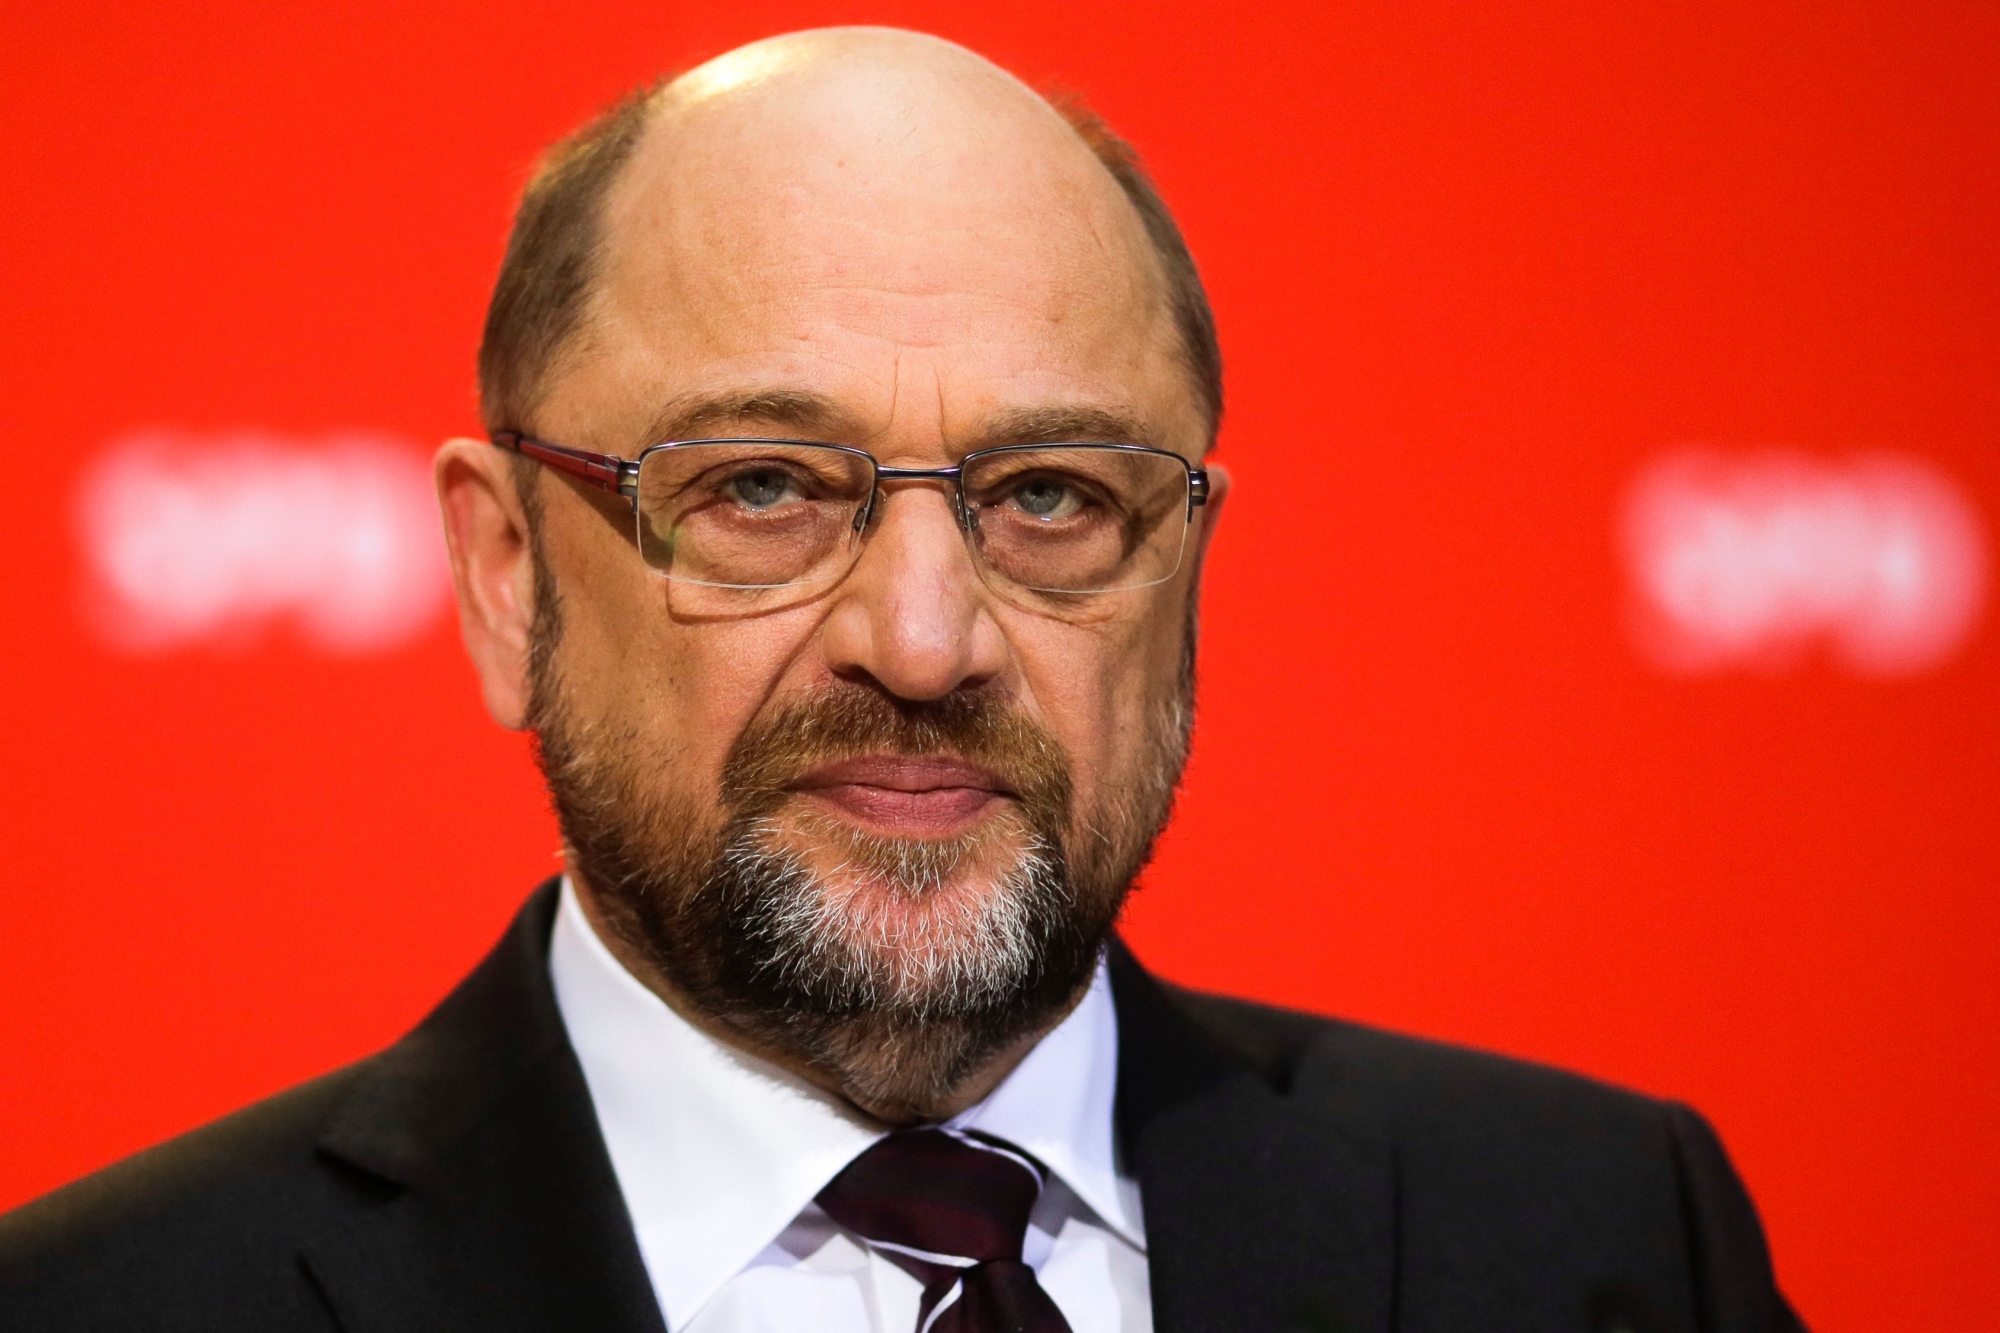 Social Democratic Party, SPD, chairman Martin Schulz attends a news conference after a board meeting at the party's headquarter in Berlin, Germany, Monday, Dec. 4, 2017. (AP Photo/Markus Schreiber) Germany Politics